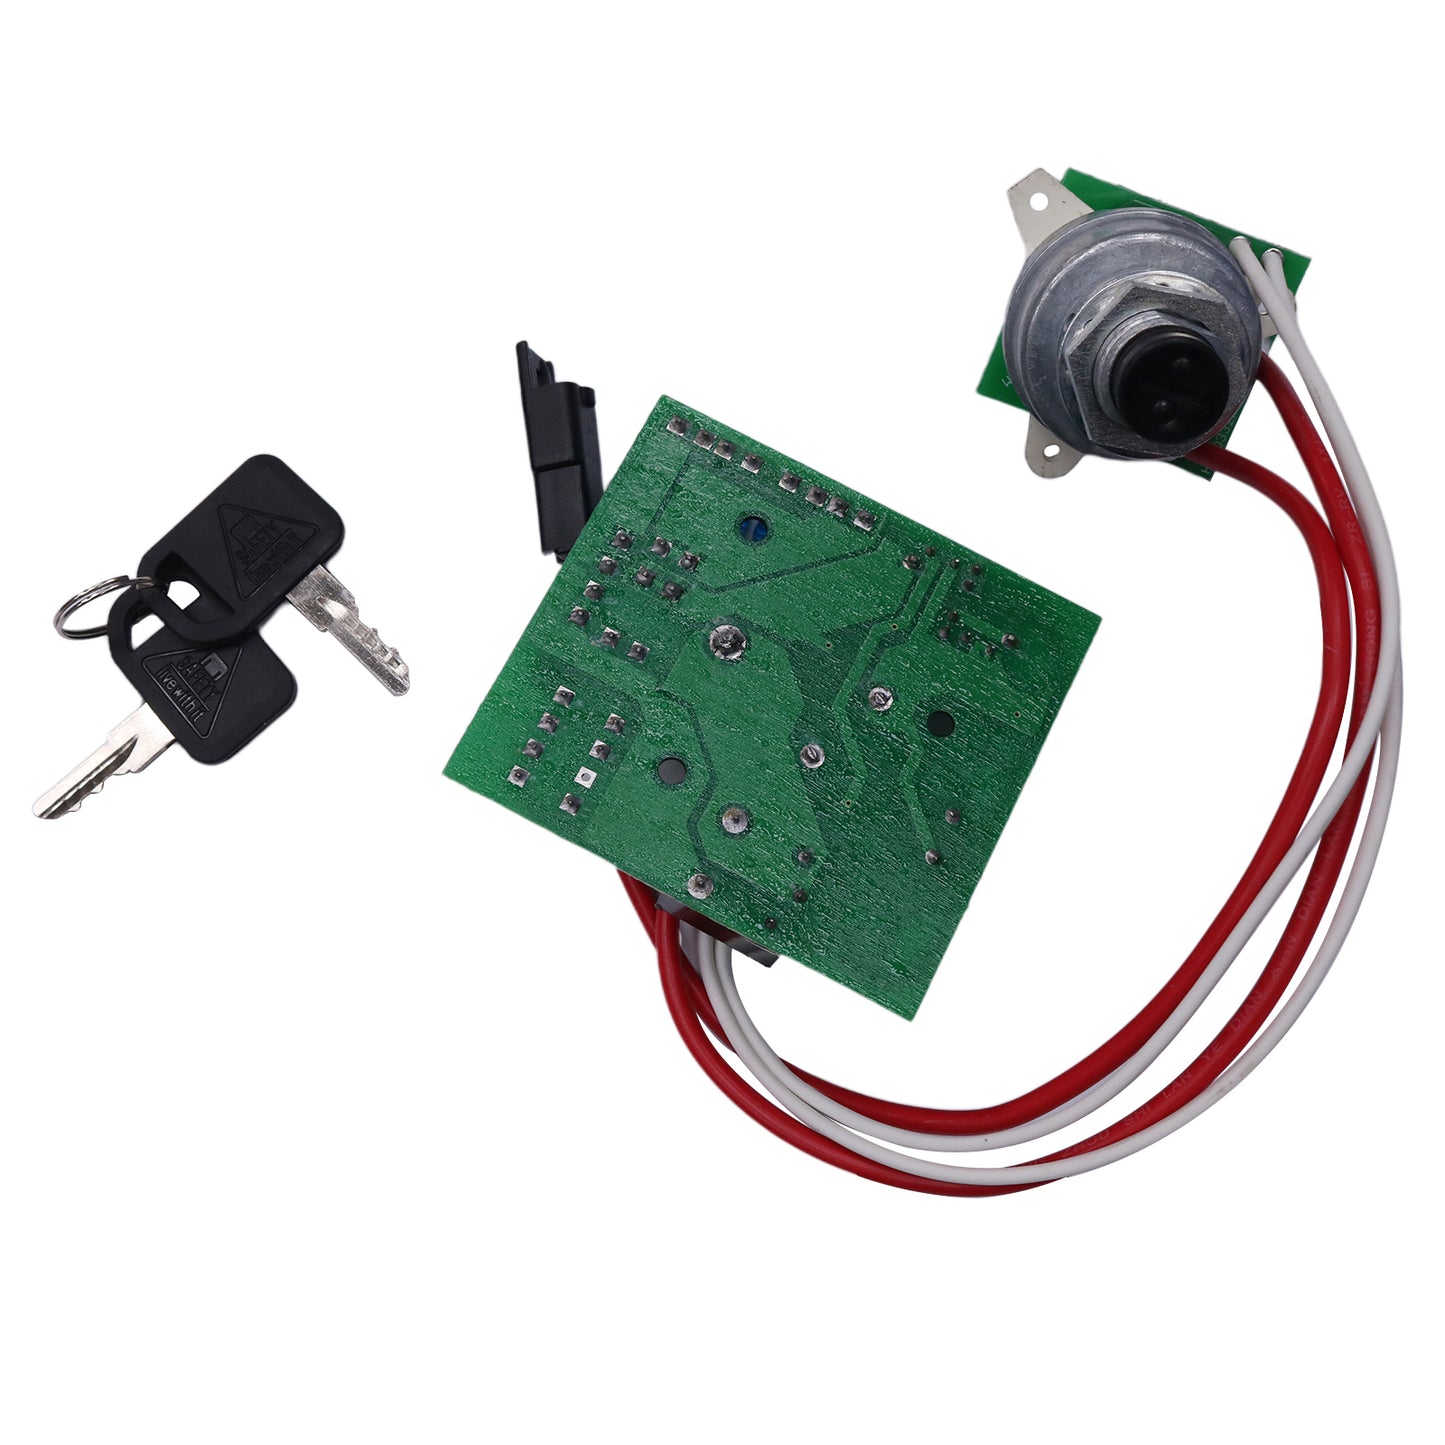 New AM124137 AM119999 Ignition Switch Module with Keys Compatible with John Deere Garden Tractors 325 335 345 Serial #s Below 070